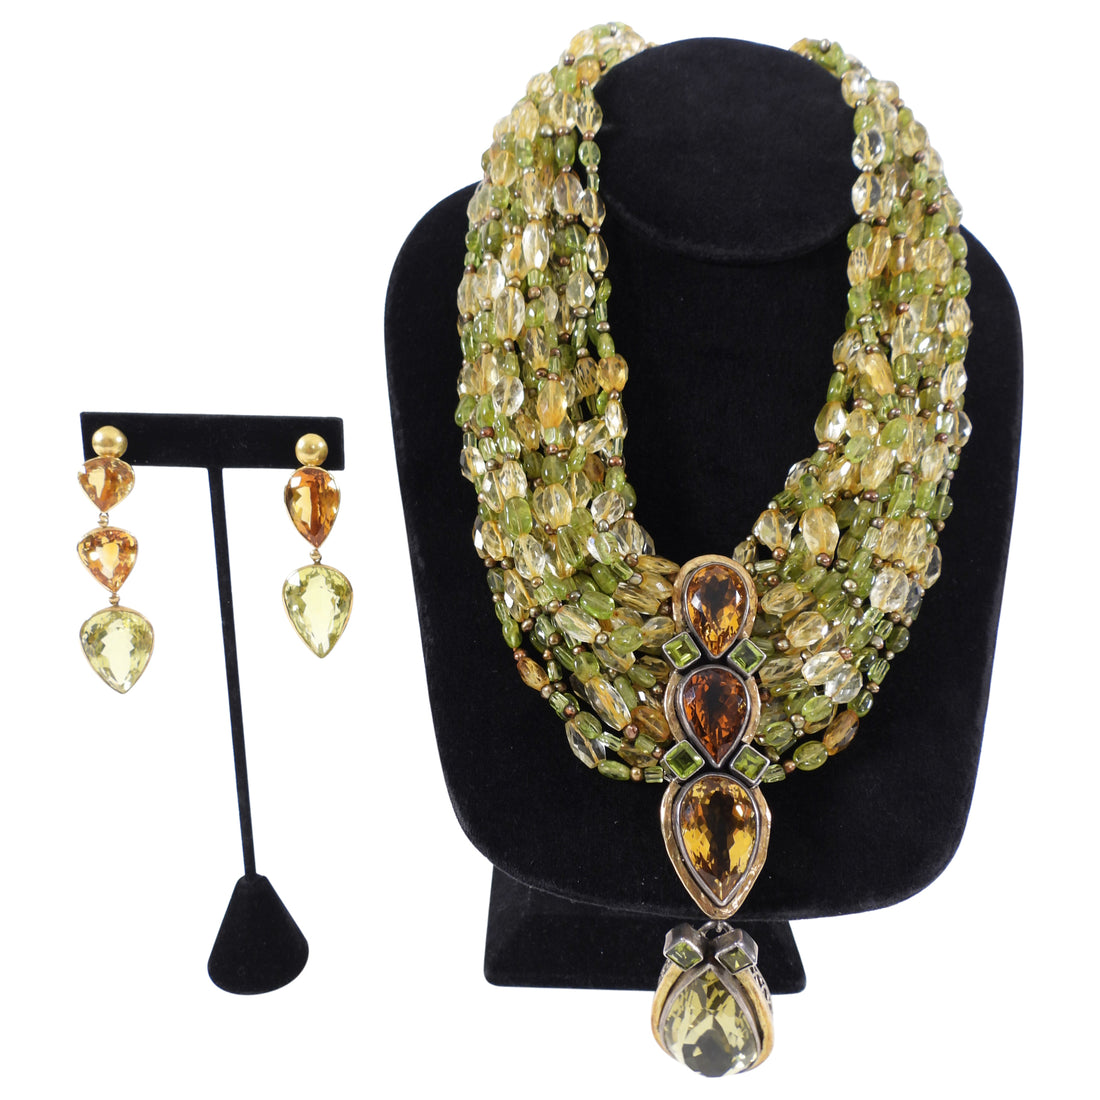 Eileen Coyne 22k Gold Tourmaline and Citrine Necklace and Earrings